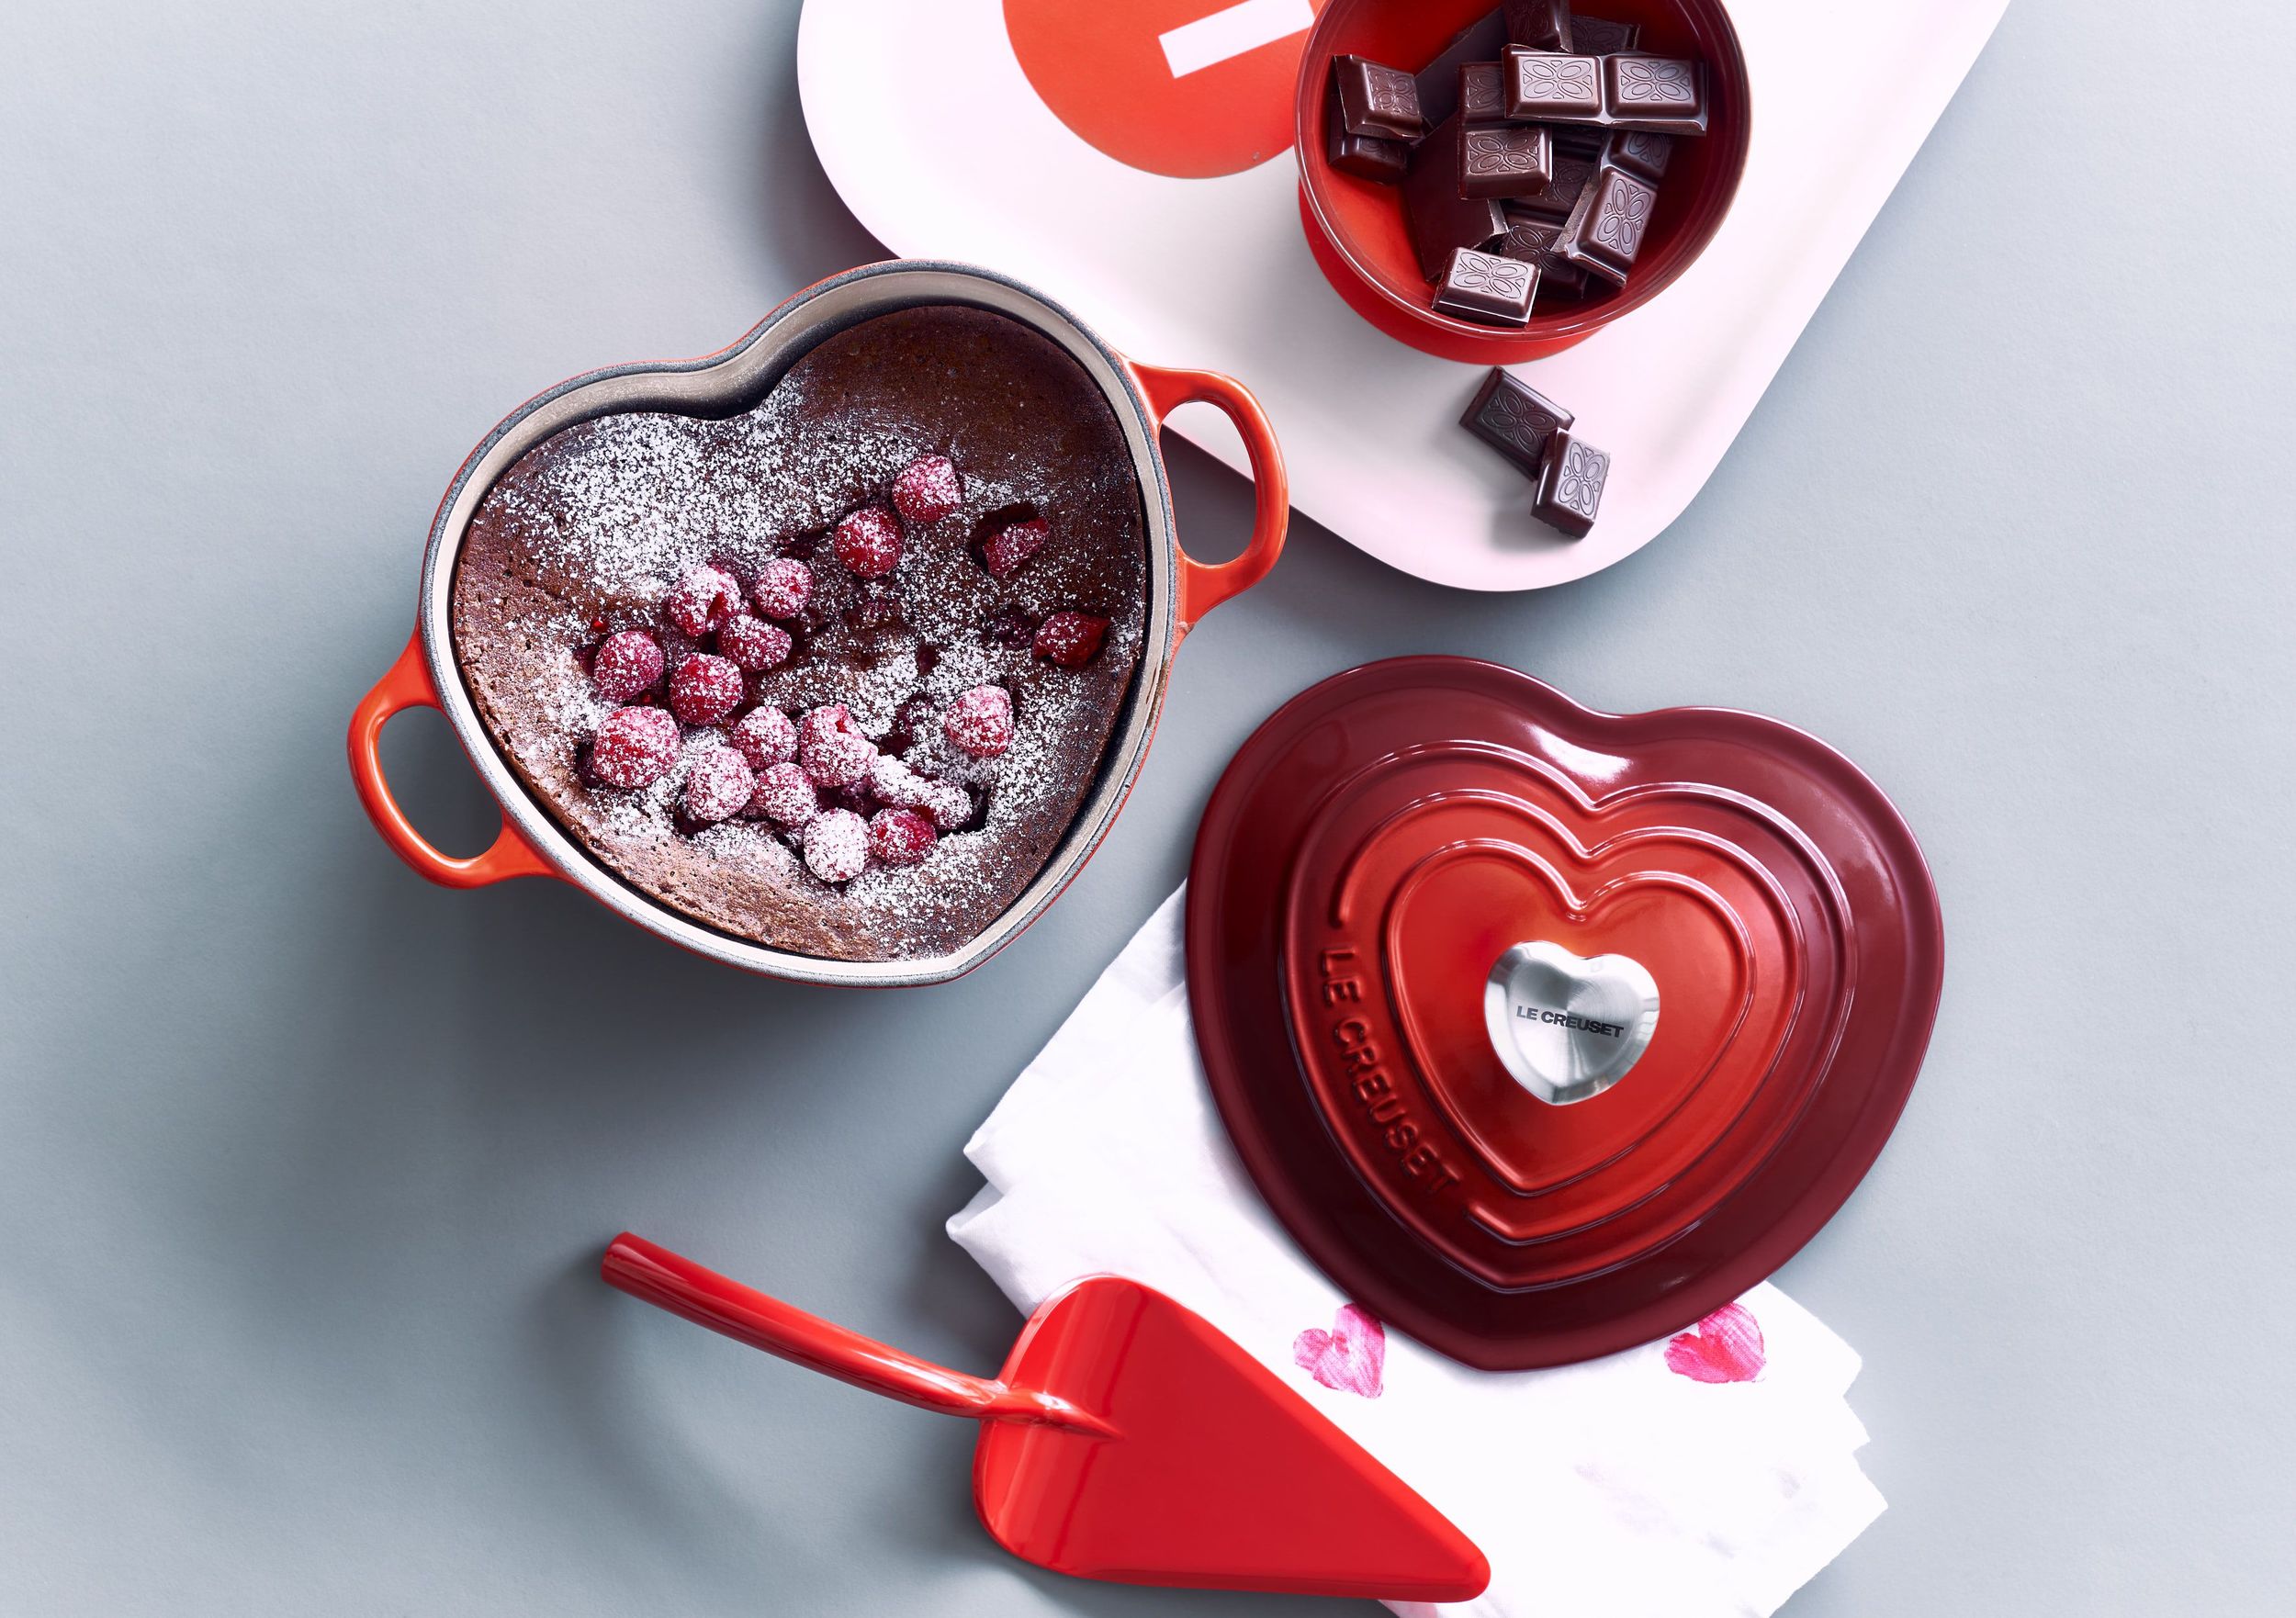 Le Creuset Valentine's Day Collection - Le Creuset Heart-Shaped